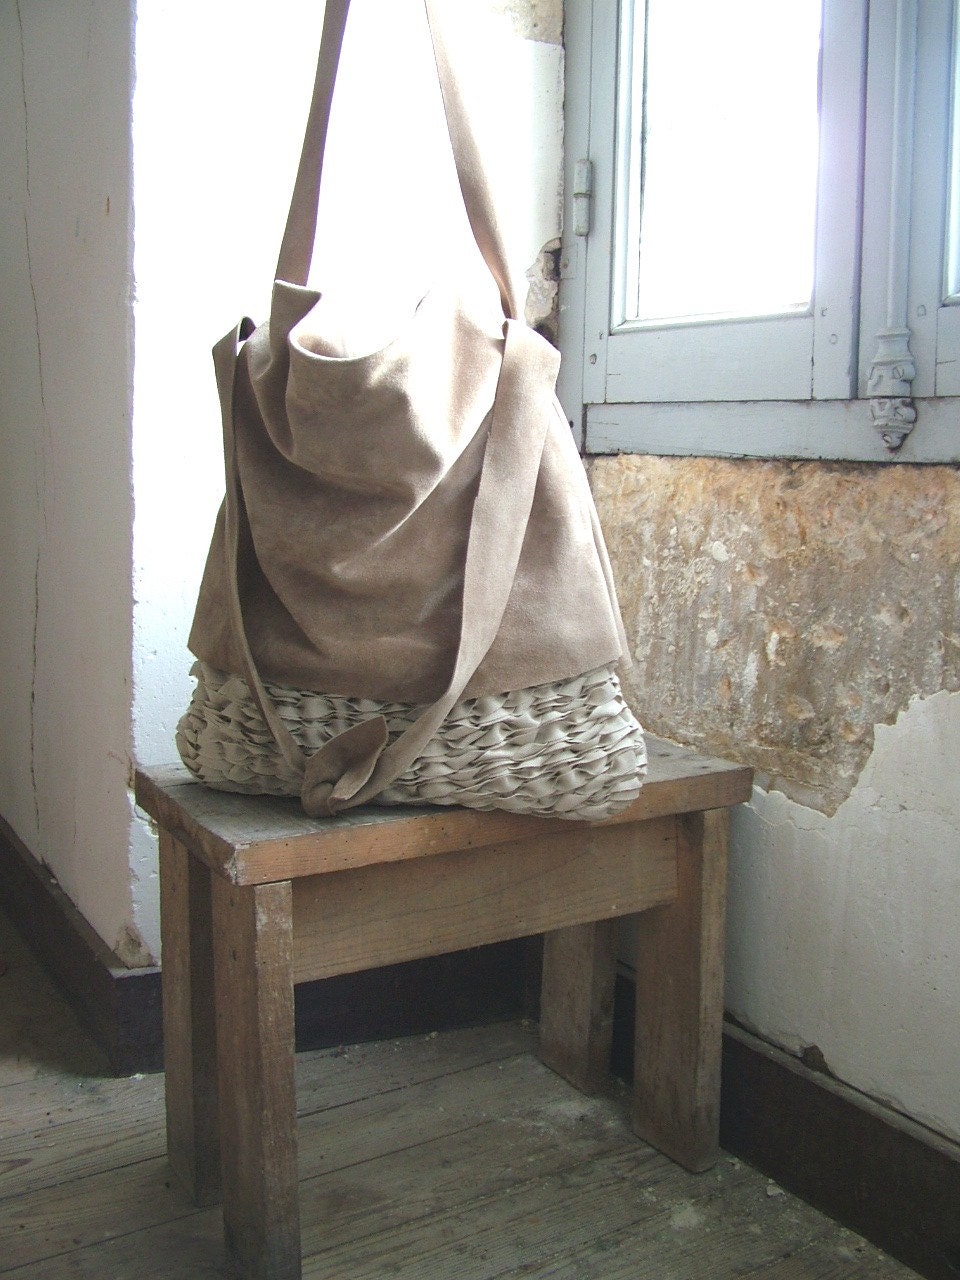 Slouchy Hobo Tote with Leather or Suede Finish - Handwoven to Order - byloomandhyde